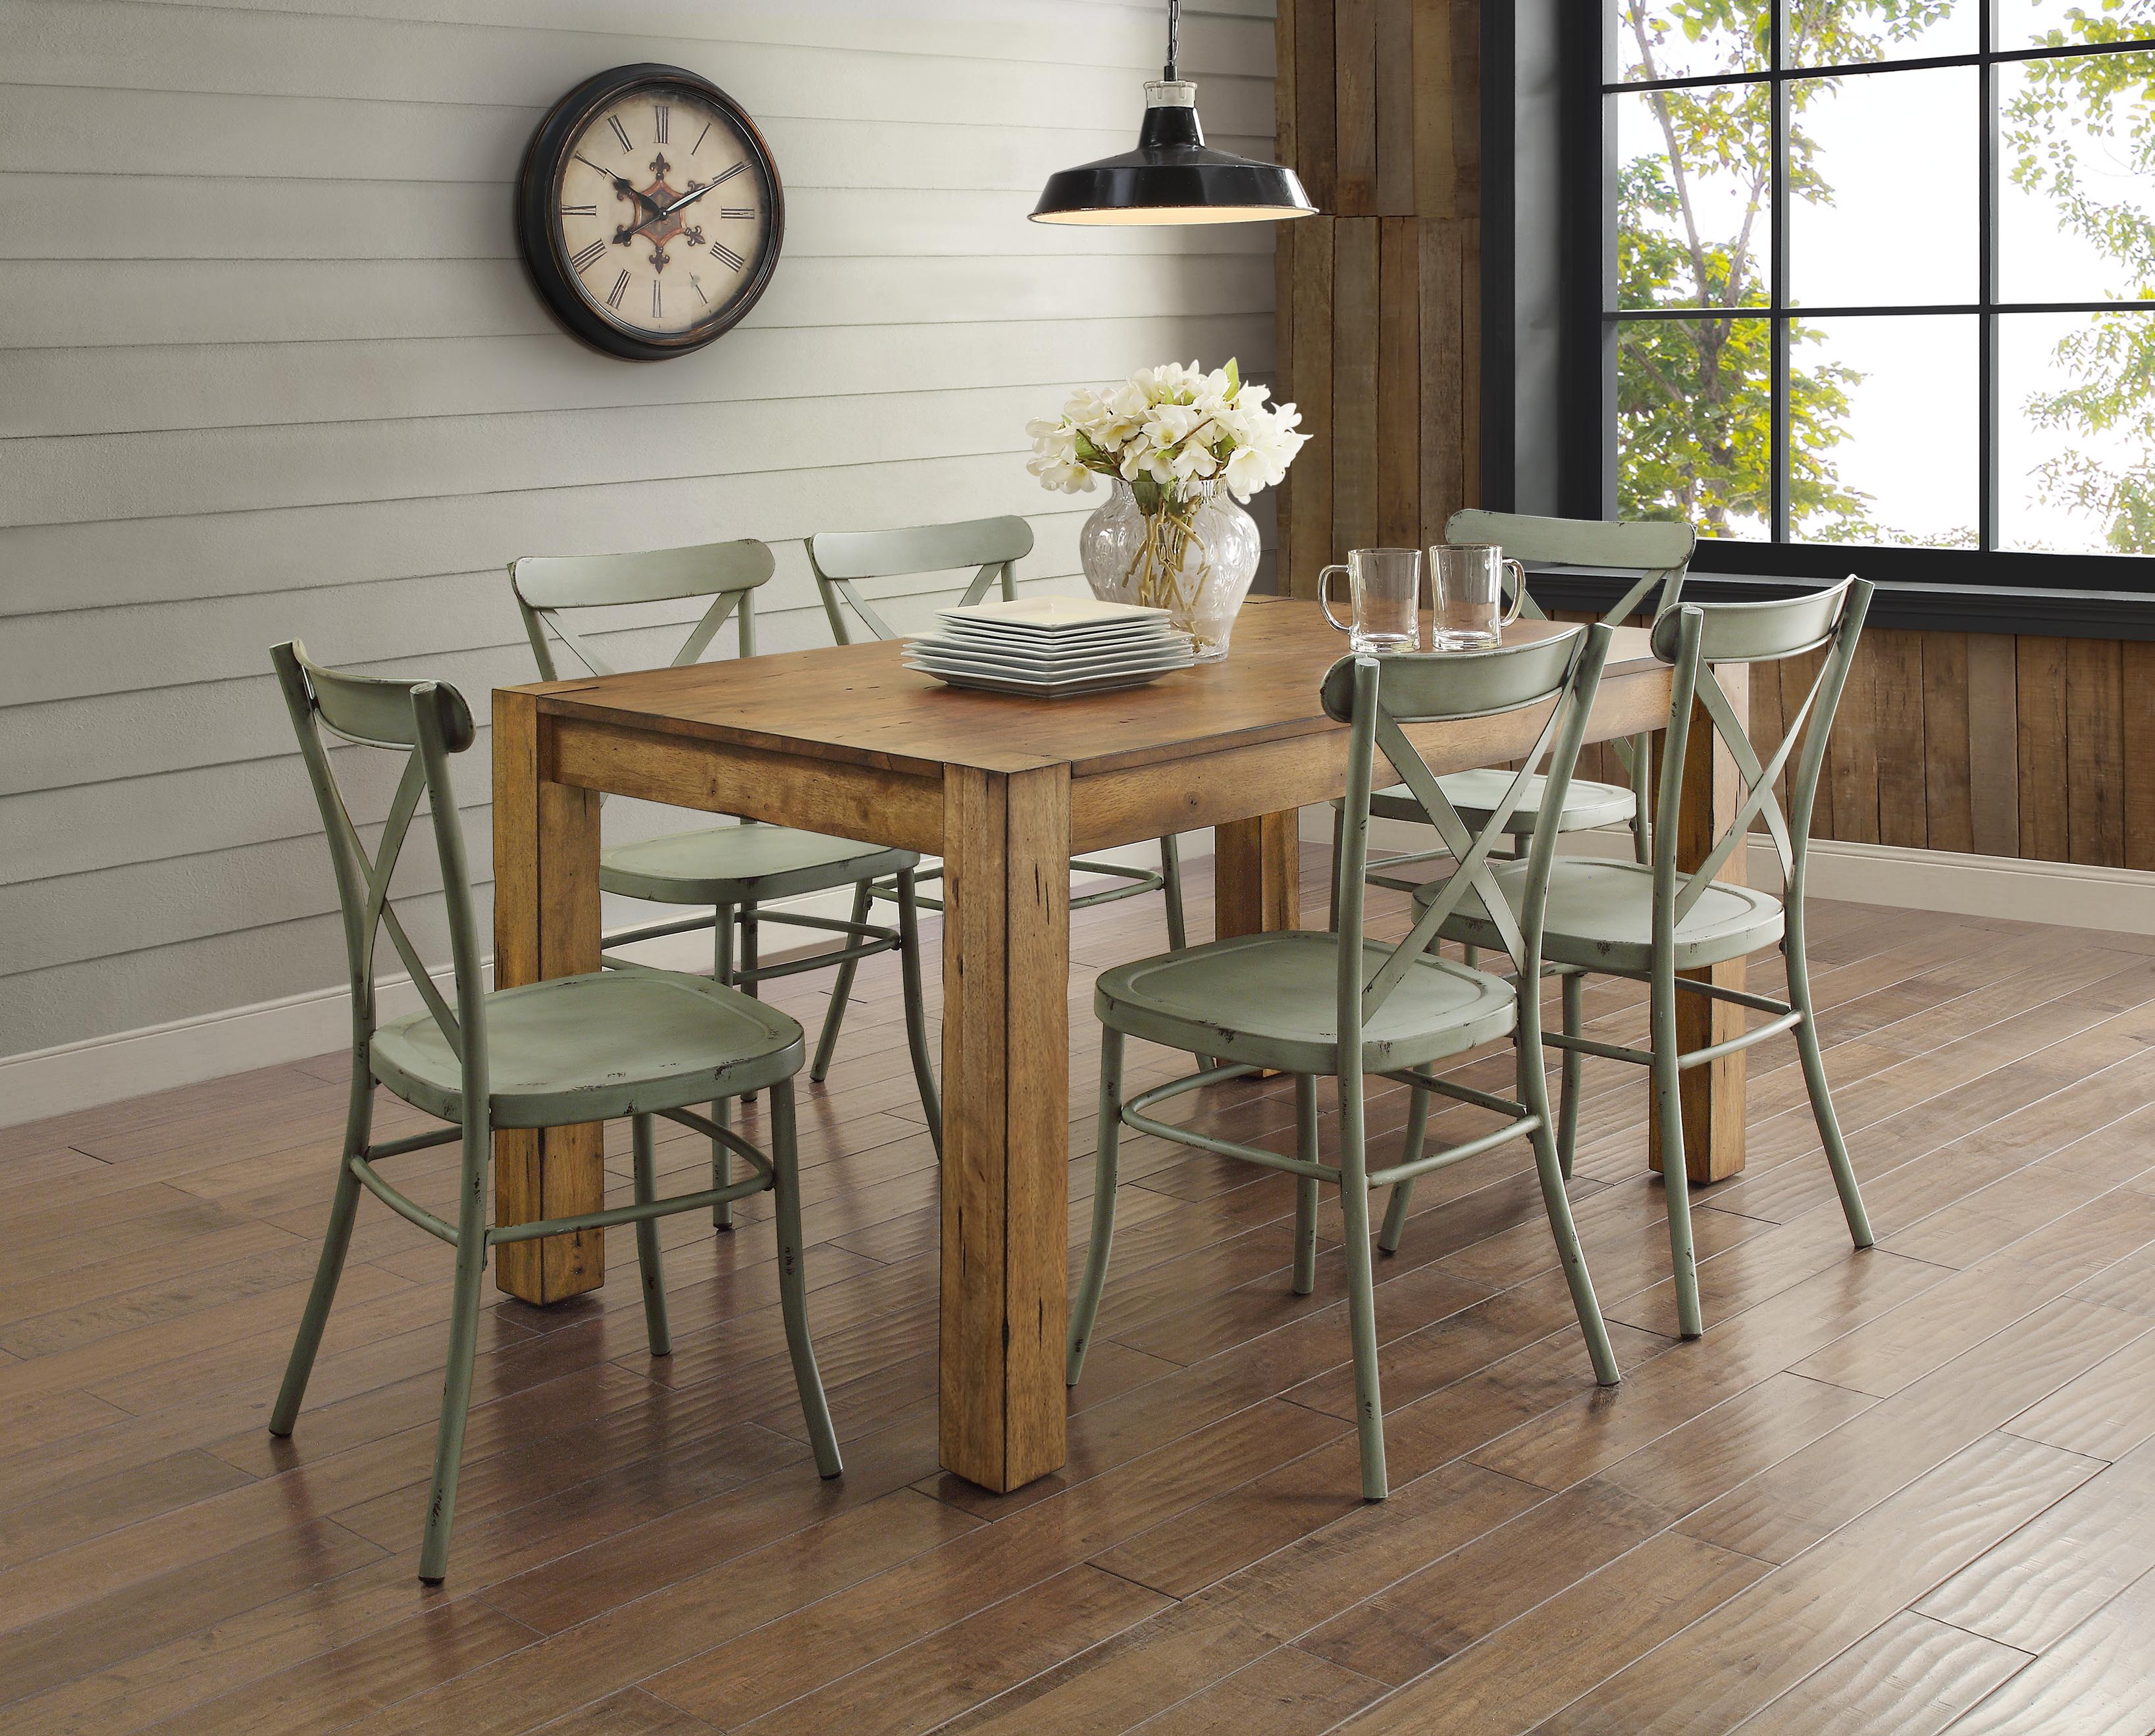 Better Homes & Gardens Bryant Solid Wood Dining Table, Rustic Brown - image 9 of 14